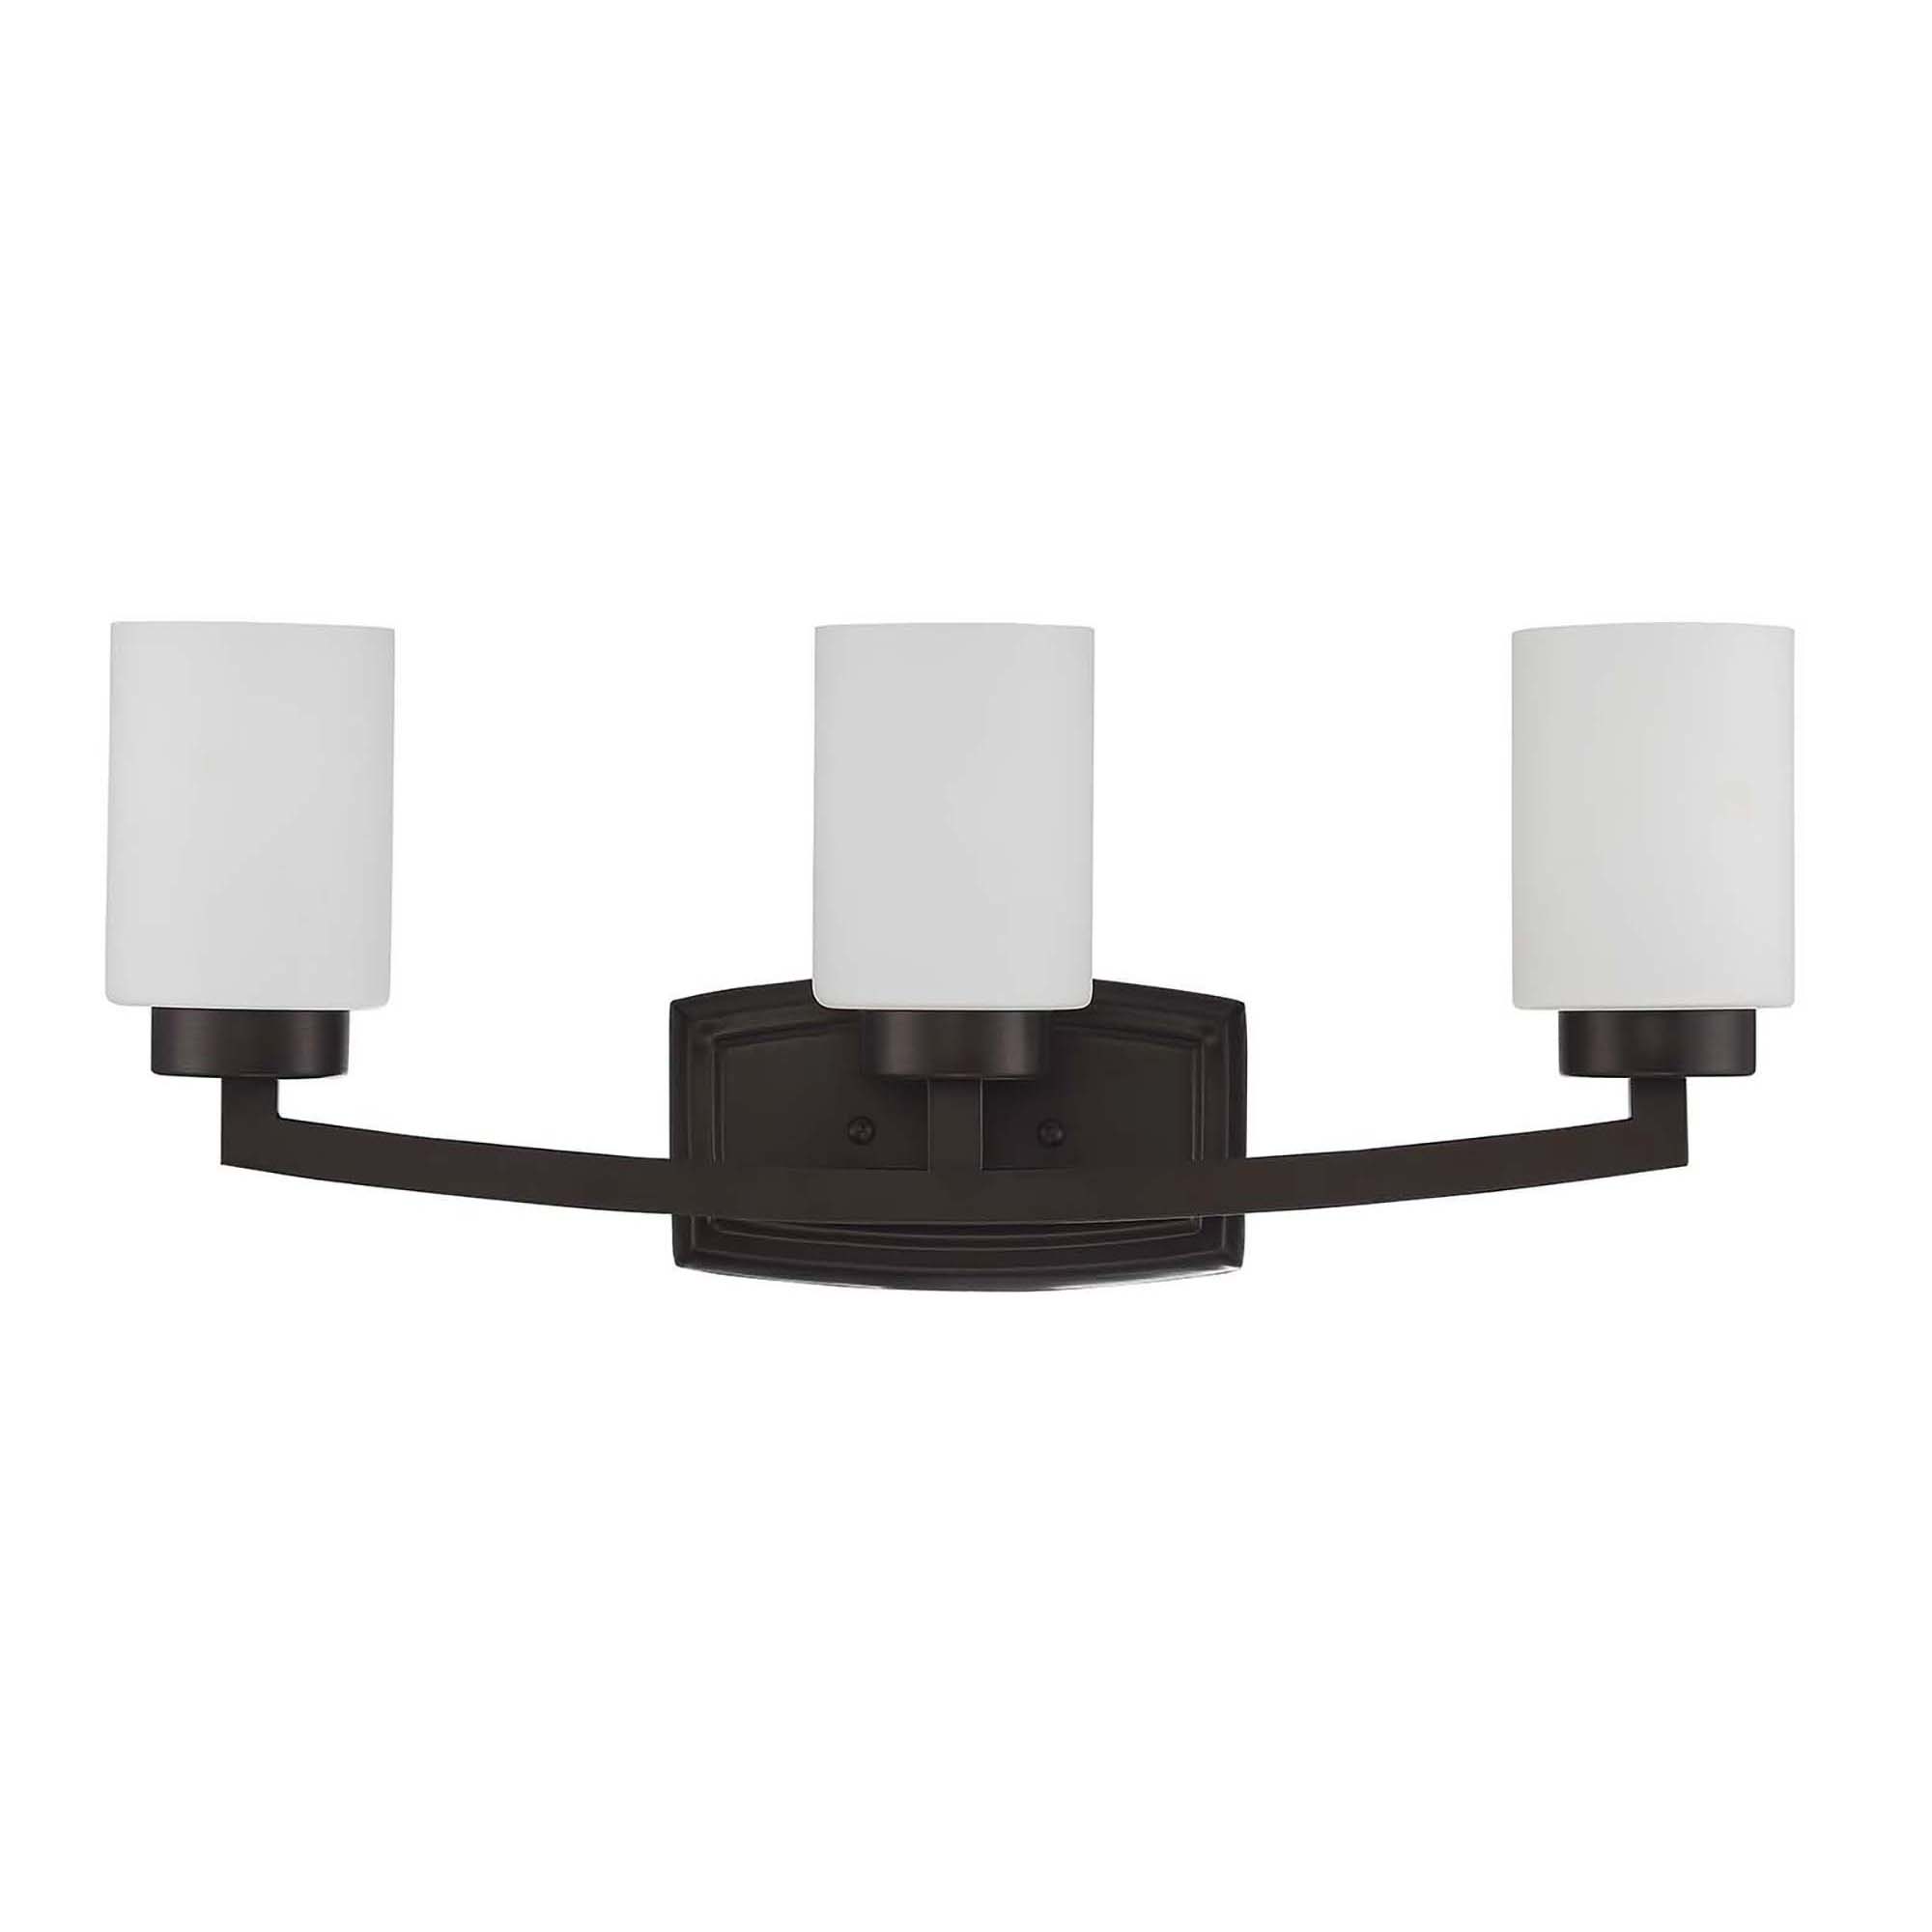 Sunset Lighting Three Light Hadley Vanity - Opal Glass, Dimmable - with Provincial Bronze Finish